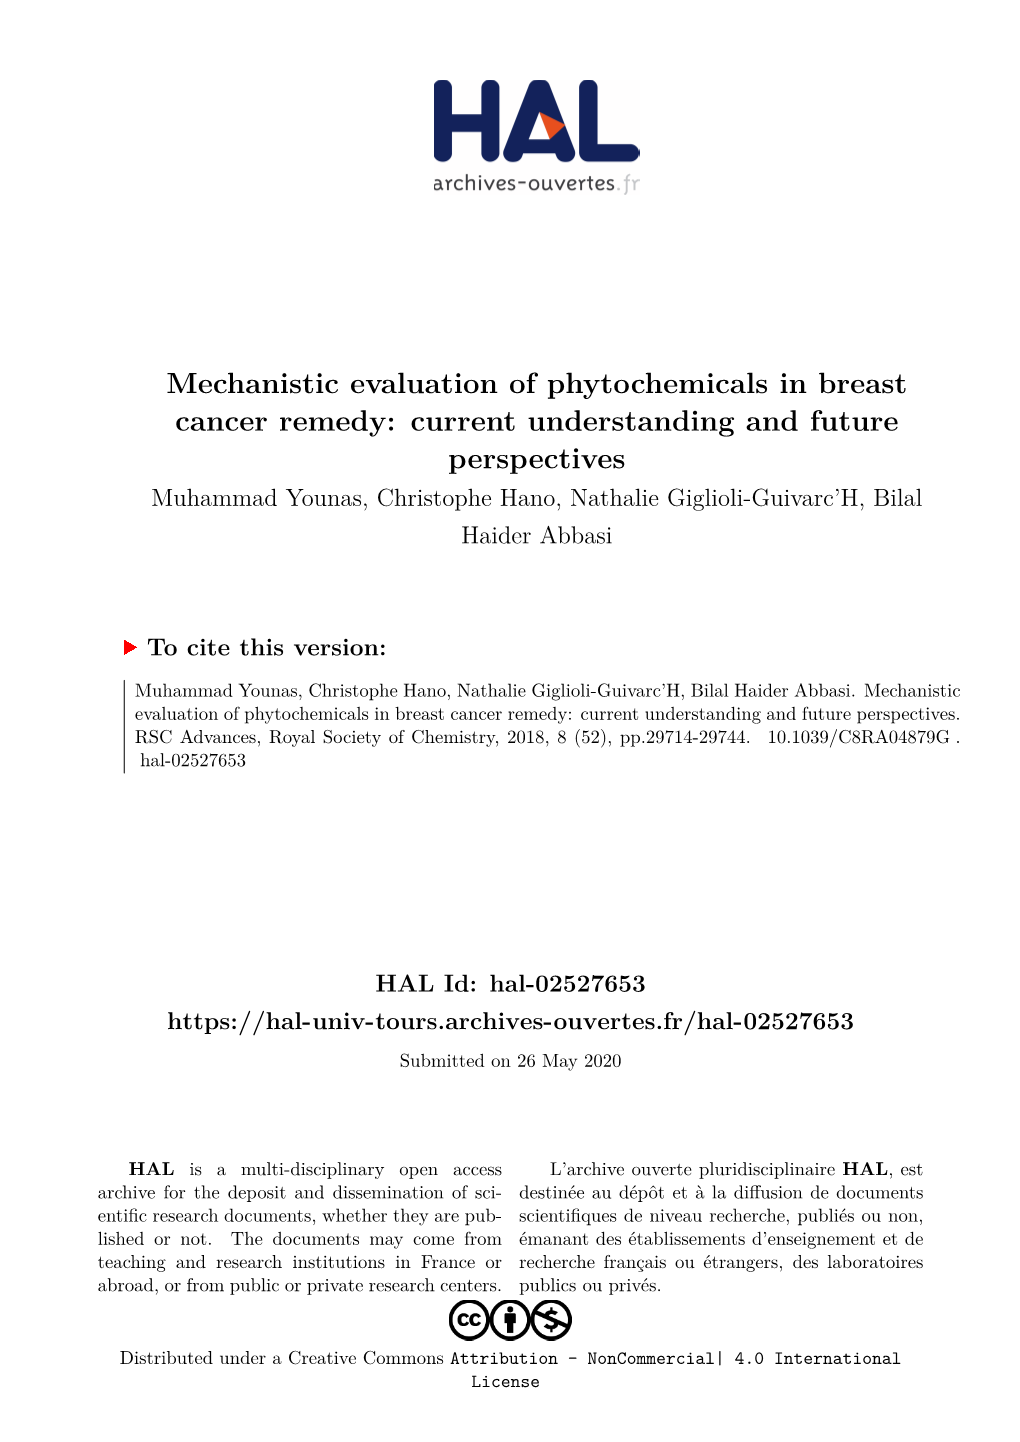 Mechanistic Evaluation of Phytochemicals